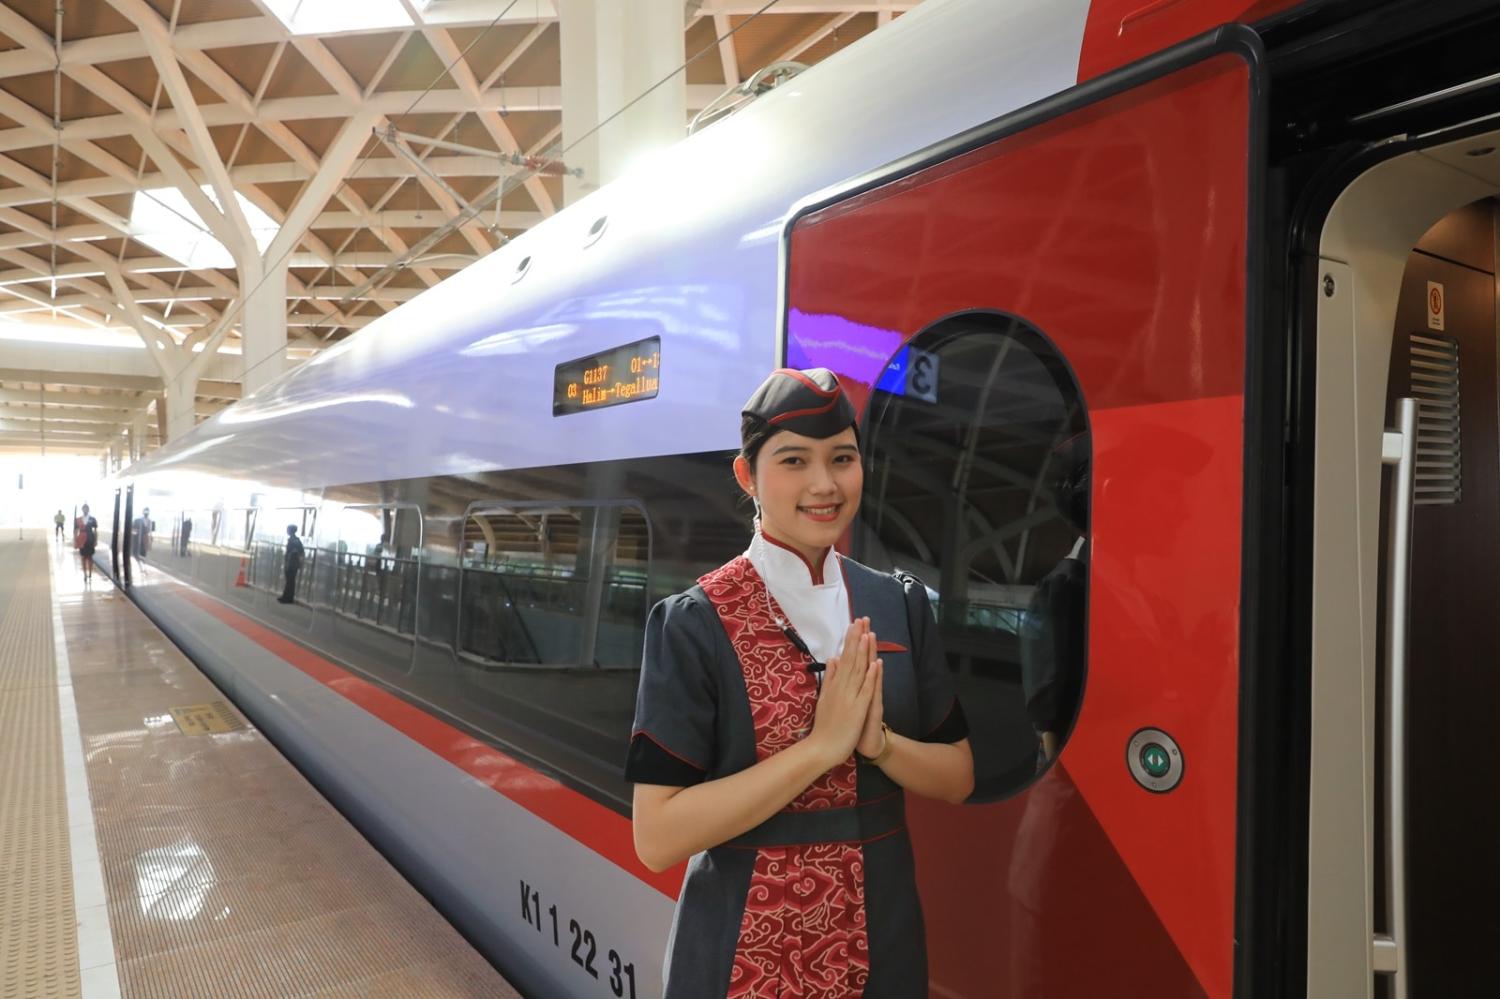 The Jakarta-Bandung high-speed railway was jointly built by China and Indonesia (Li Zhiquan/China News Service/VCG via Getty Images)